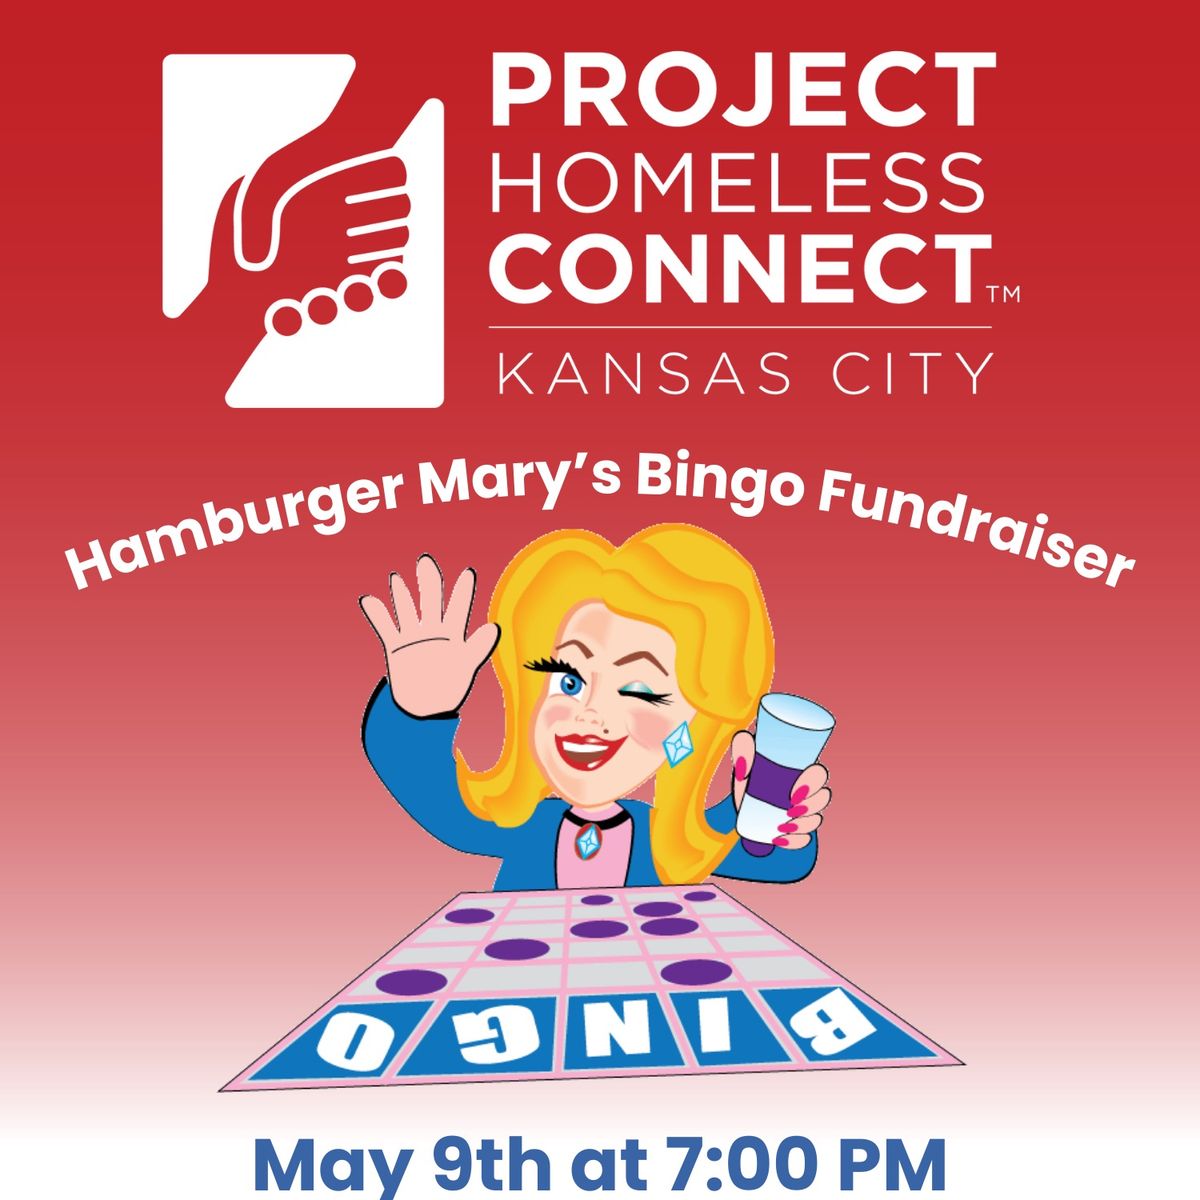 Project Homeless Connect Hambingo Fundriaser